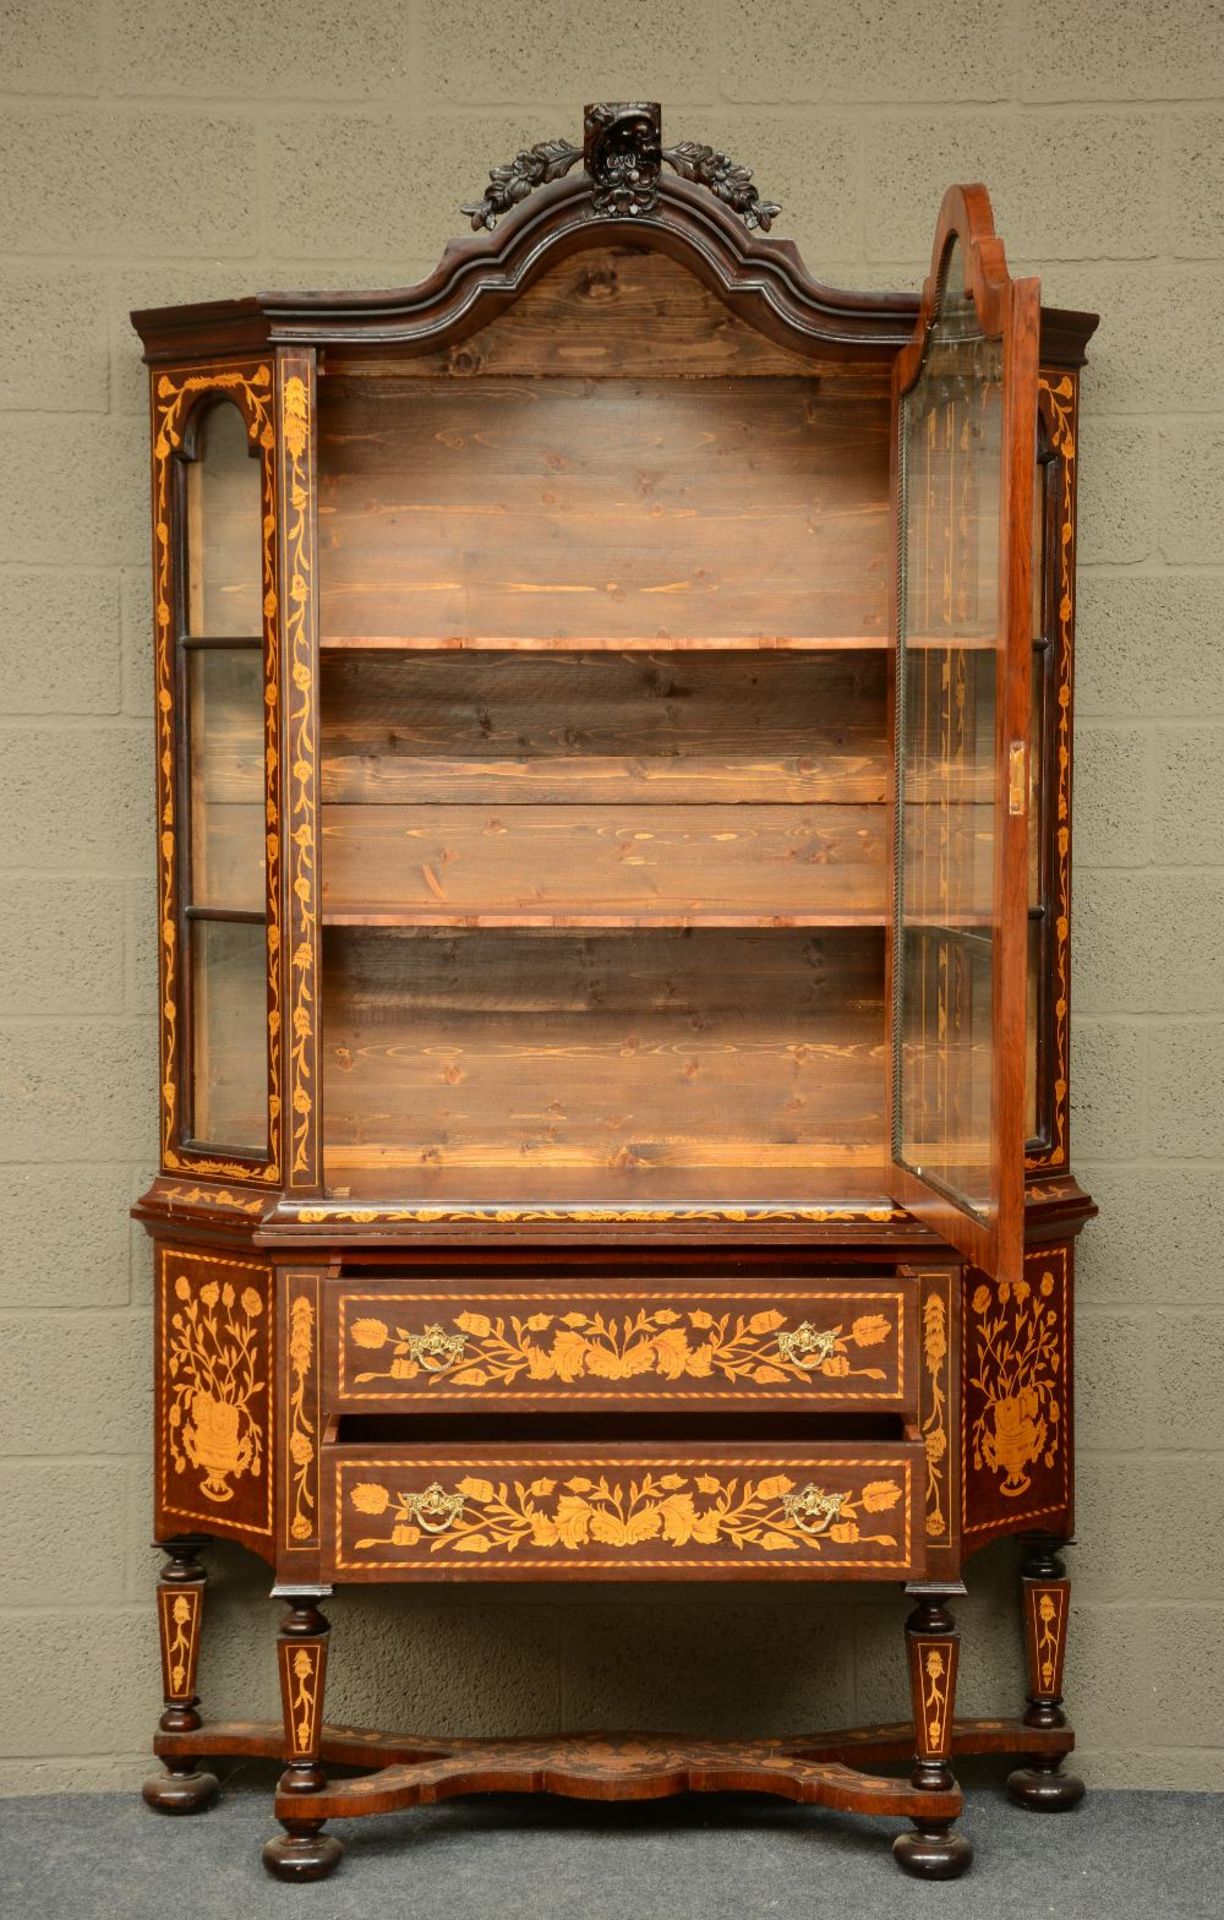 A Dutch rosewood and floral marquetry veneered china display cabinet, H 219,5 - W 125 - D 43 cm - Bild 3 aus 7